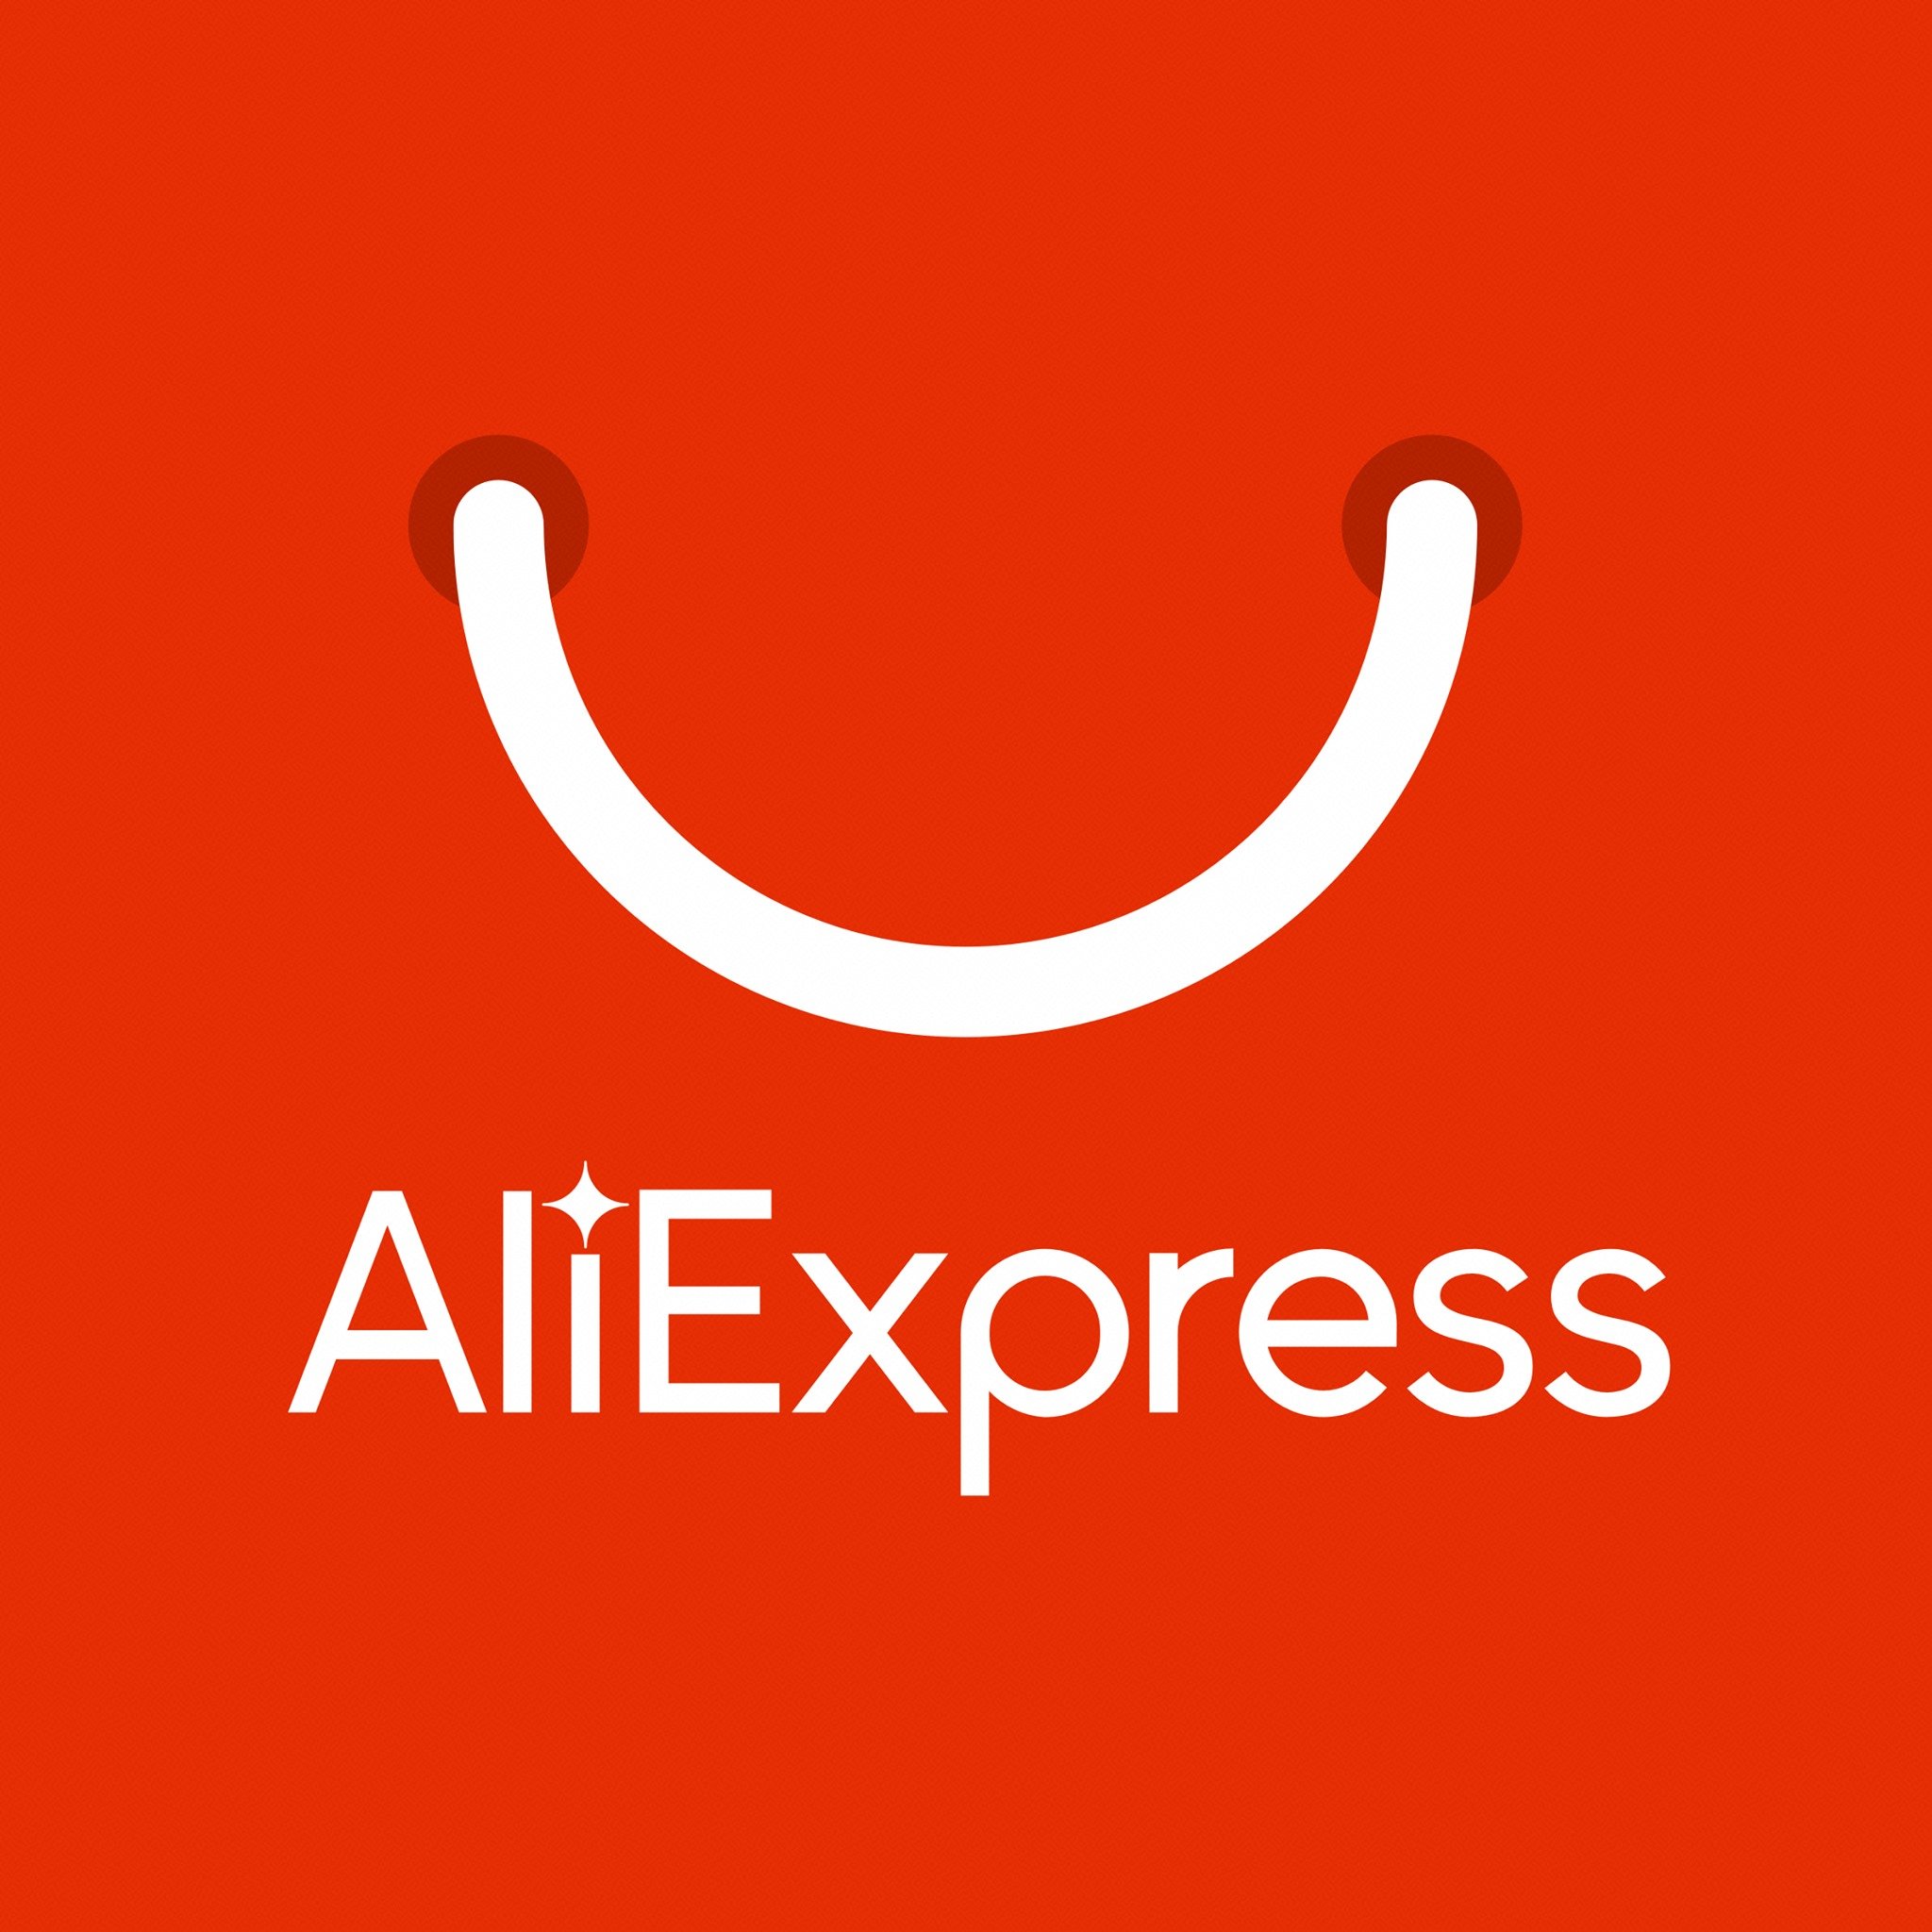 Aliexpress scams - Tips to Avoid Scams